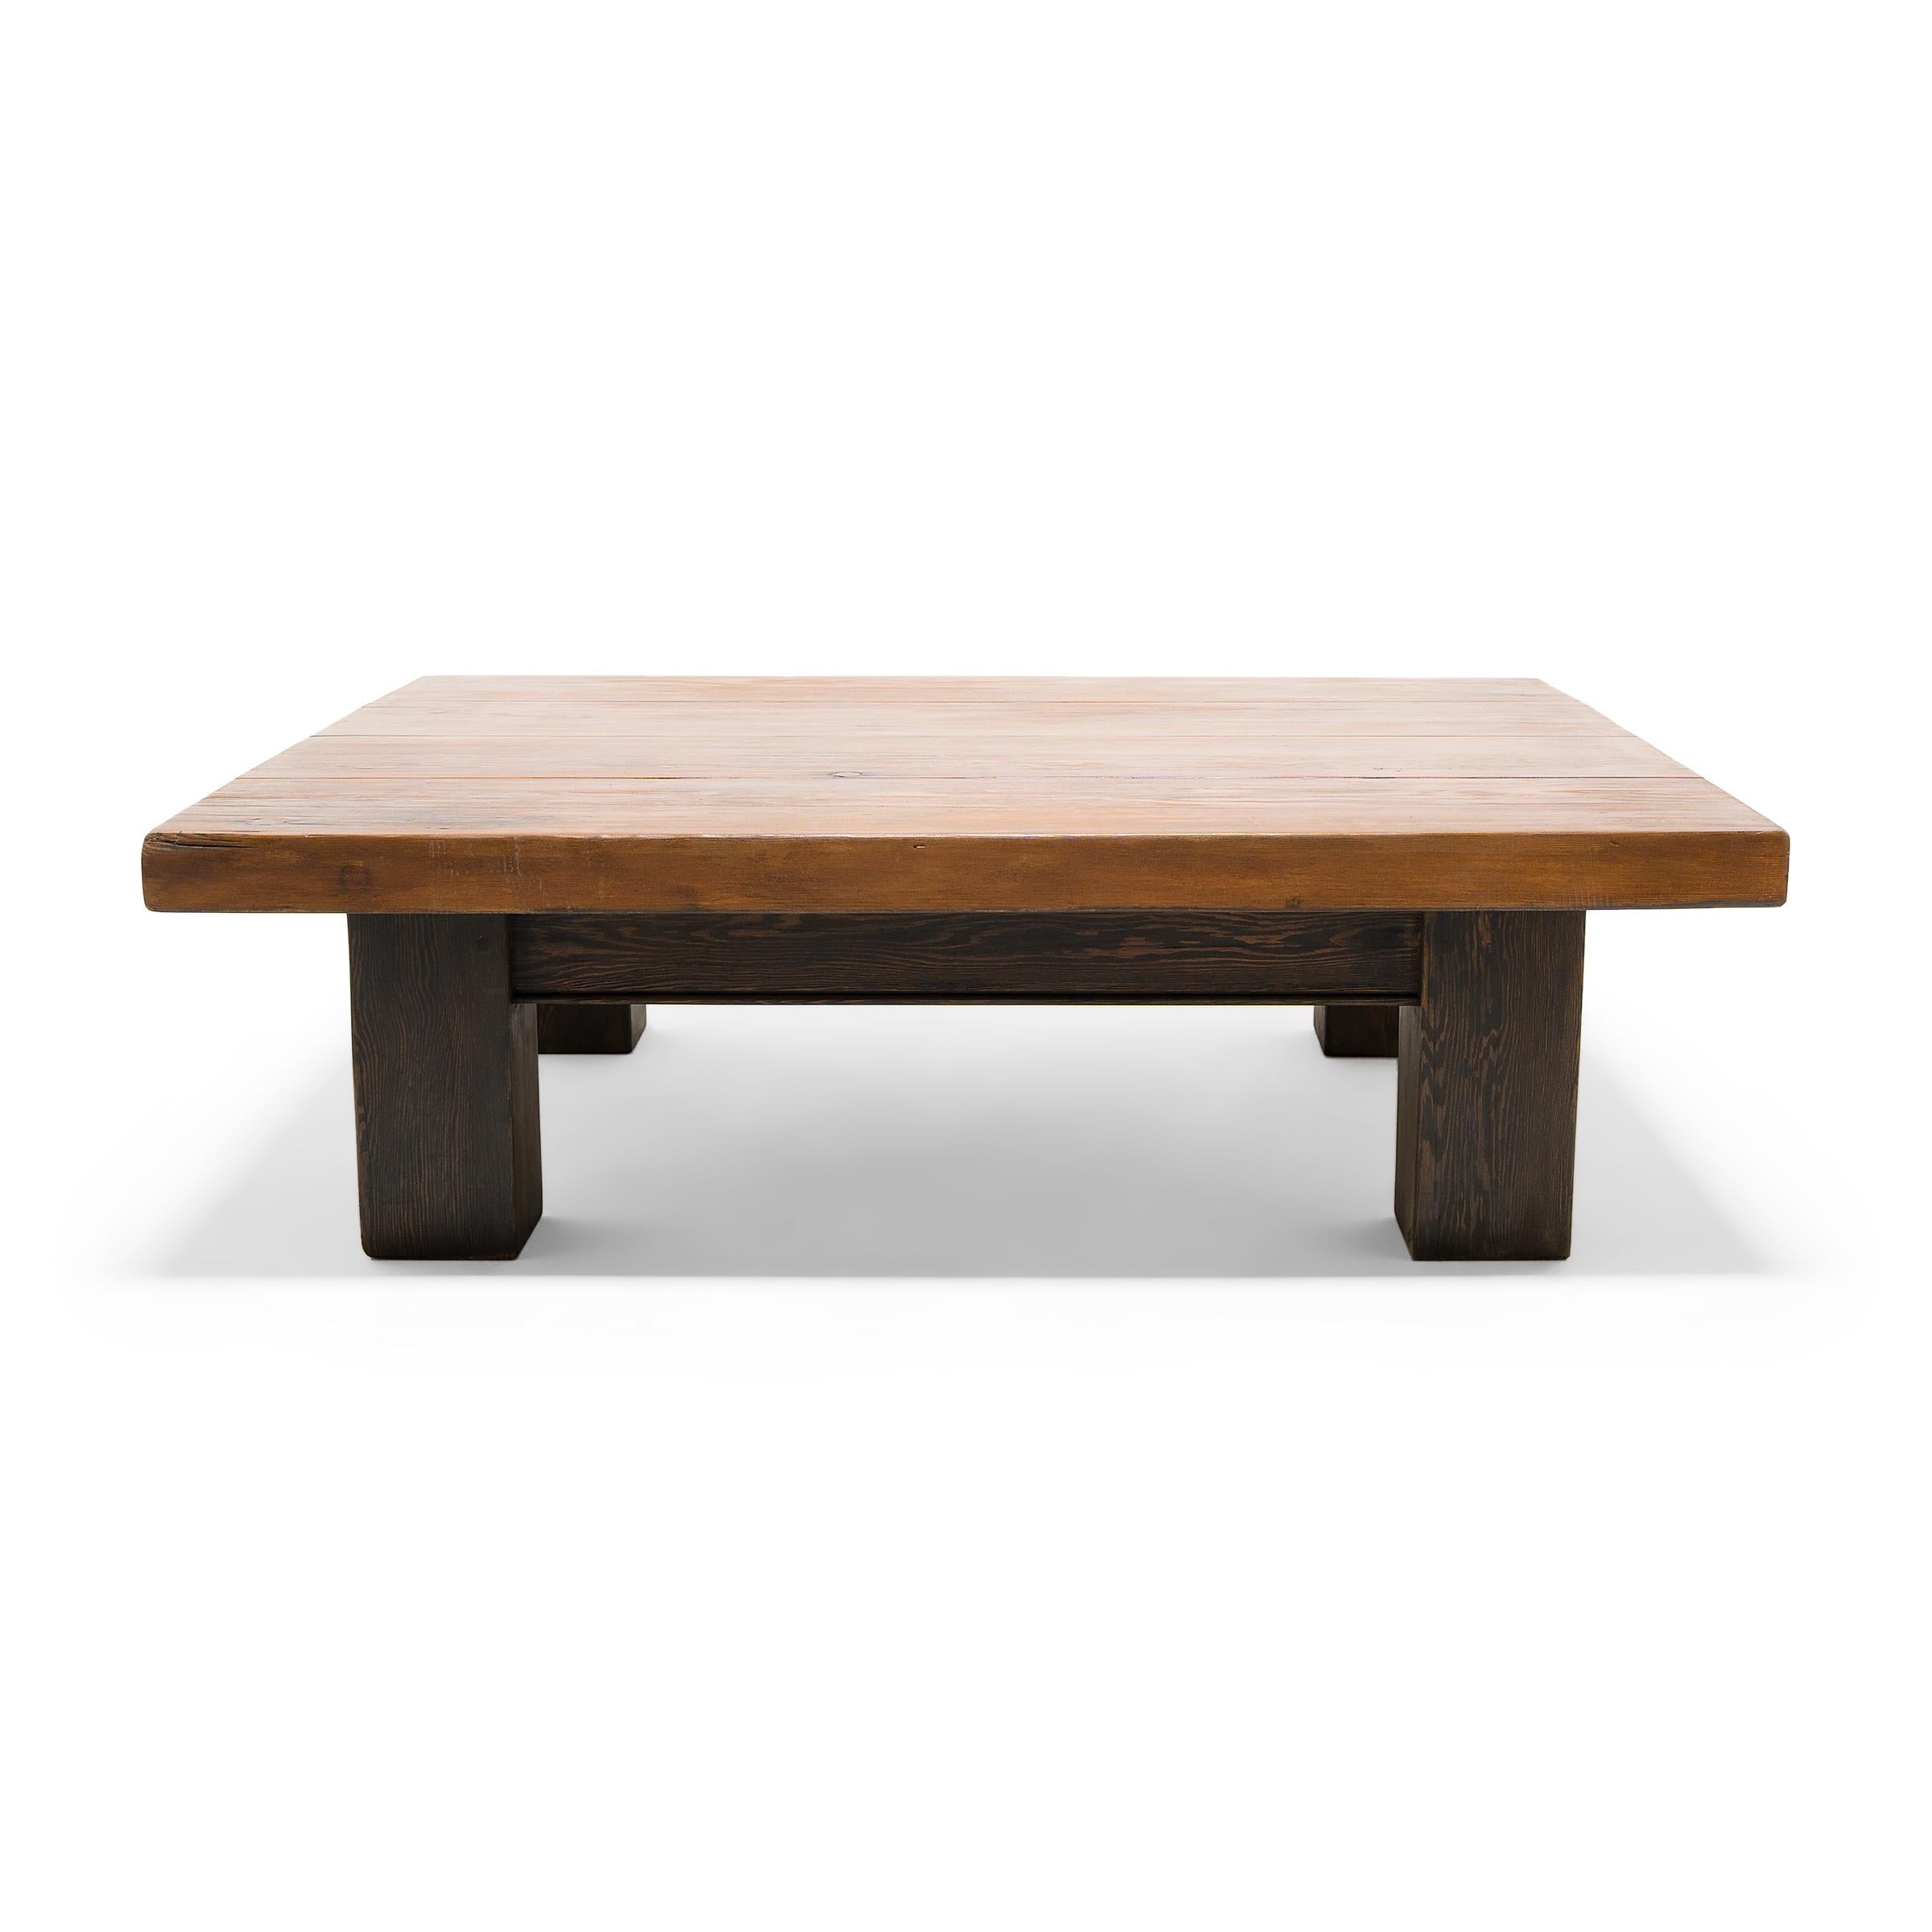 Straightforward and earnest, this example of re-purposed artistry lets the knots, grain, and imperfections of reclaimed distillery wood shine in a low table rich with character. With timeless rustic appeal, the simple design is a sophisticated